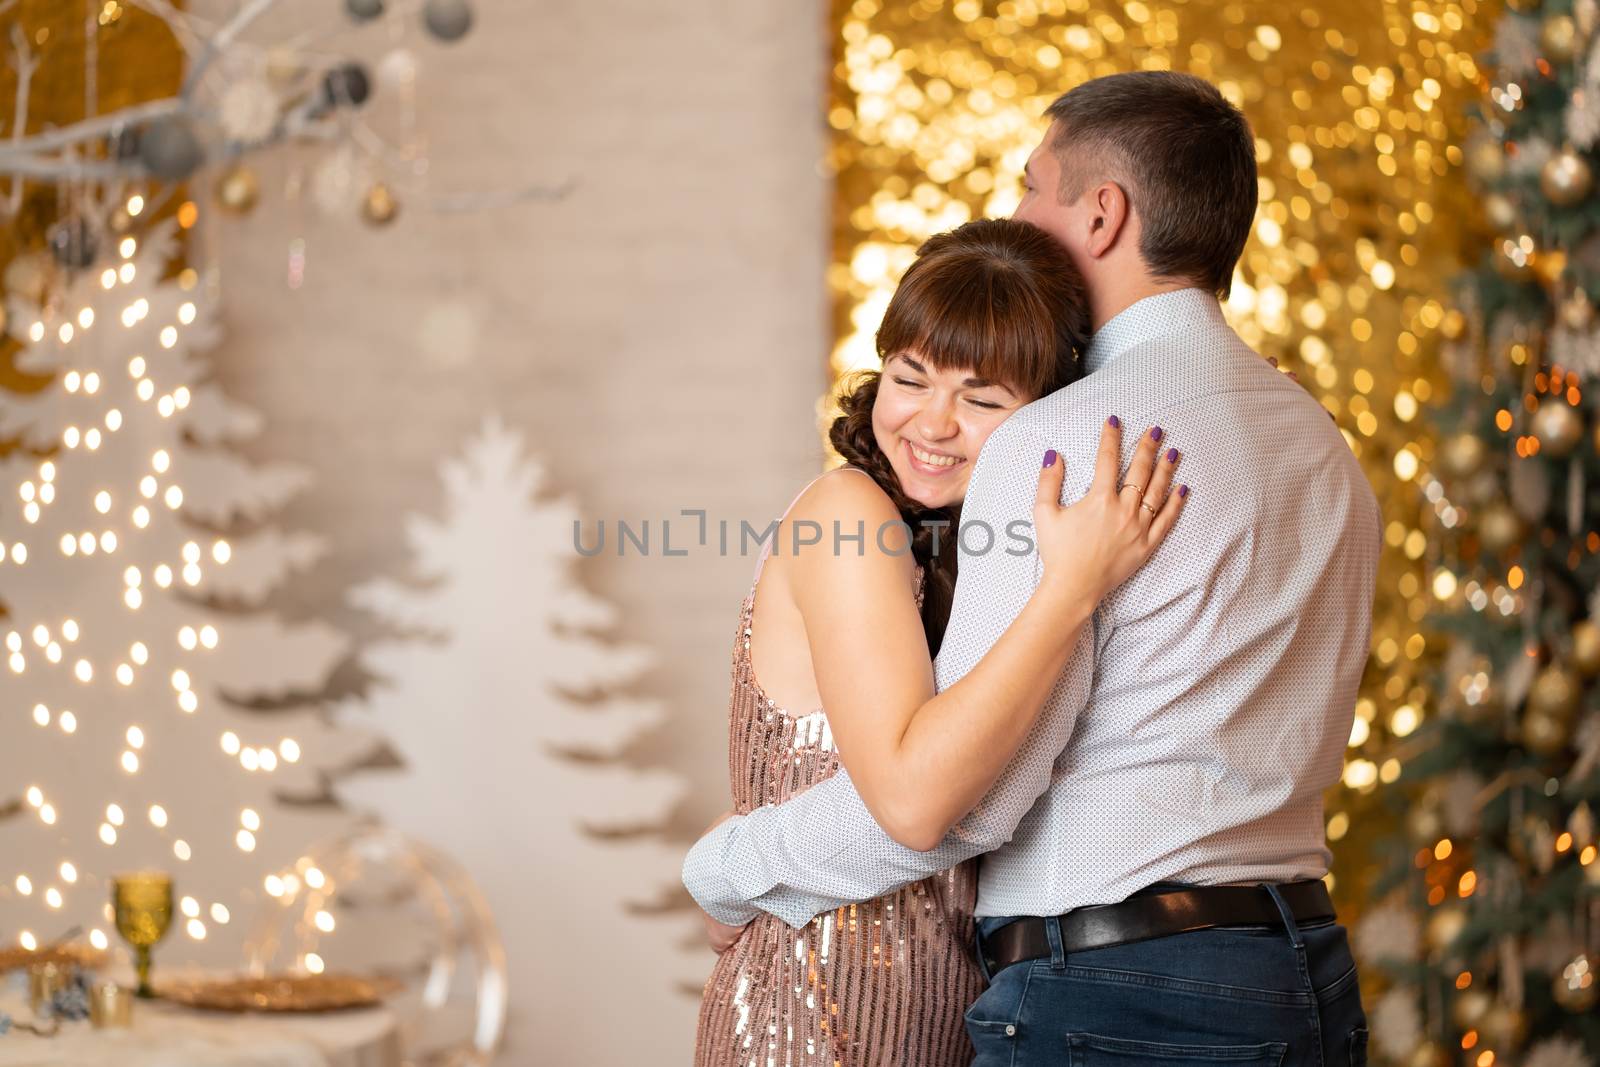 A joyful girl hugs a guy among sparkles and gerlands at a Christmas party by Try_my_best